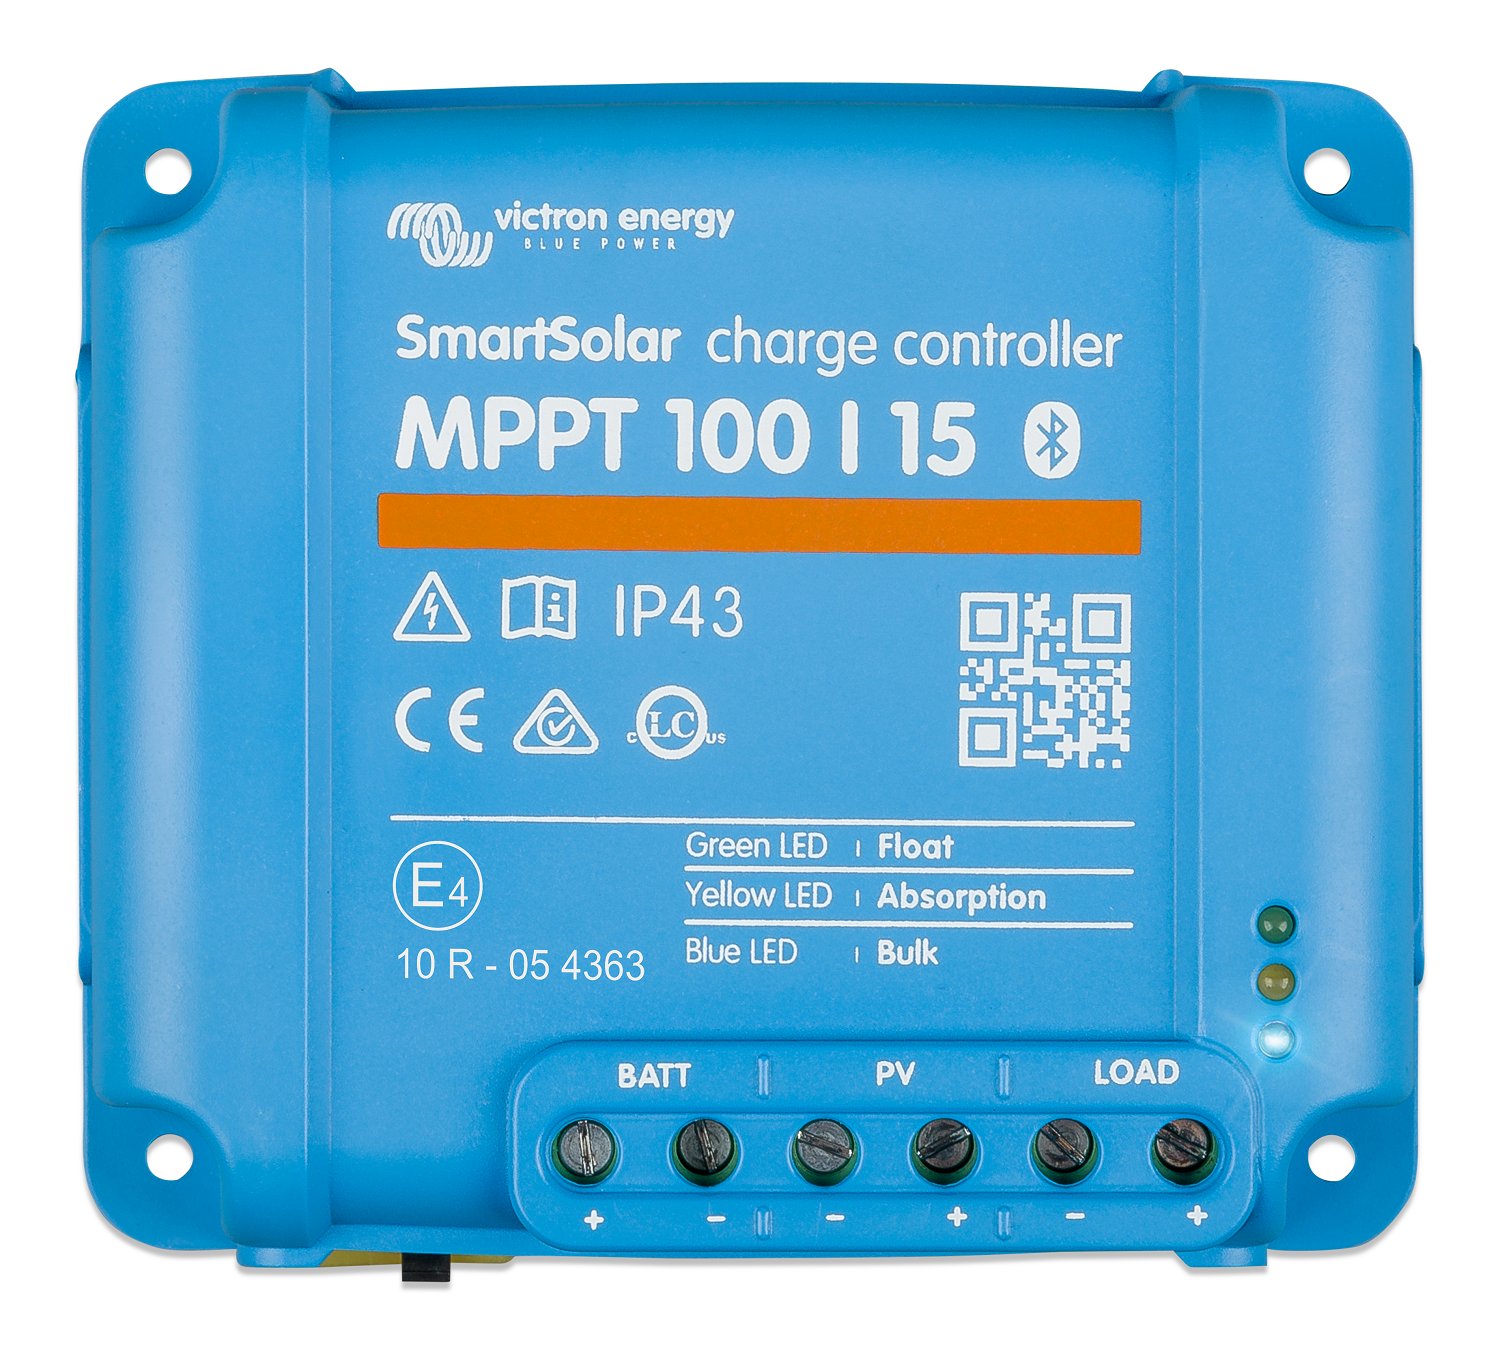 Can the Victron MPPT charge controllers be turned on/off remotely?